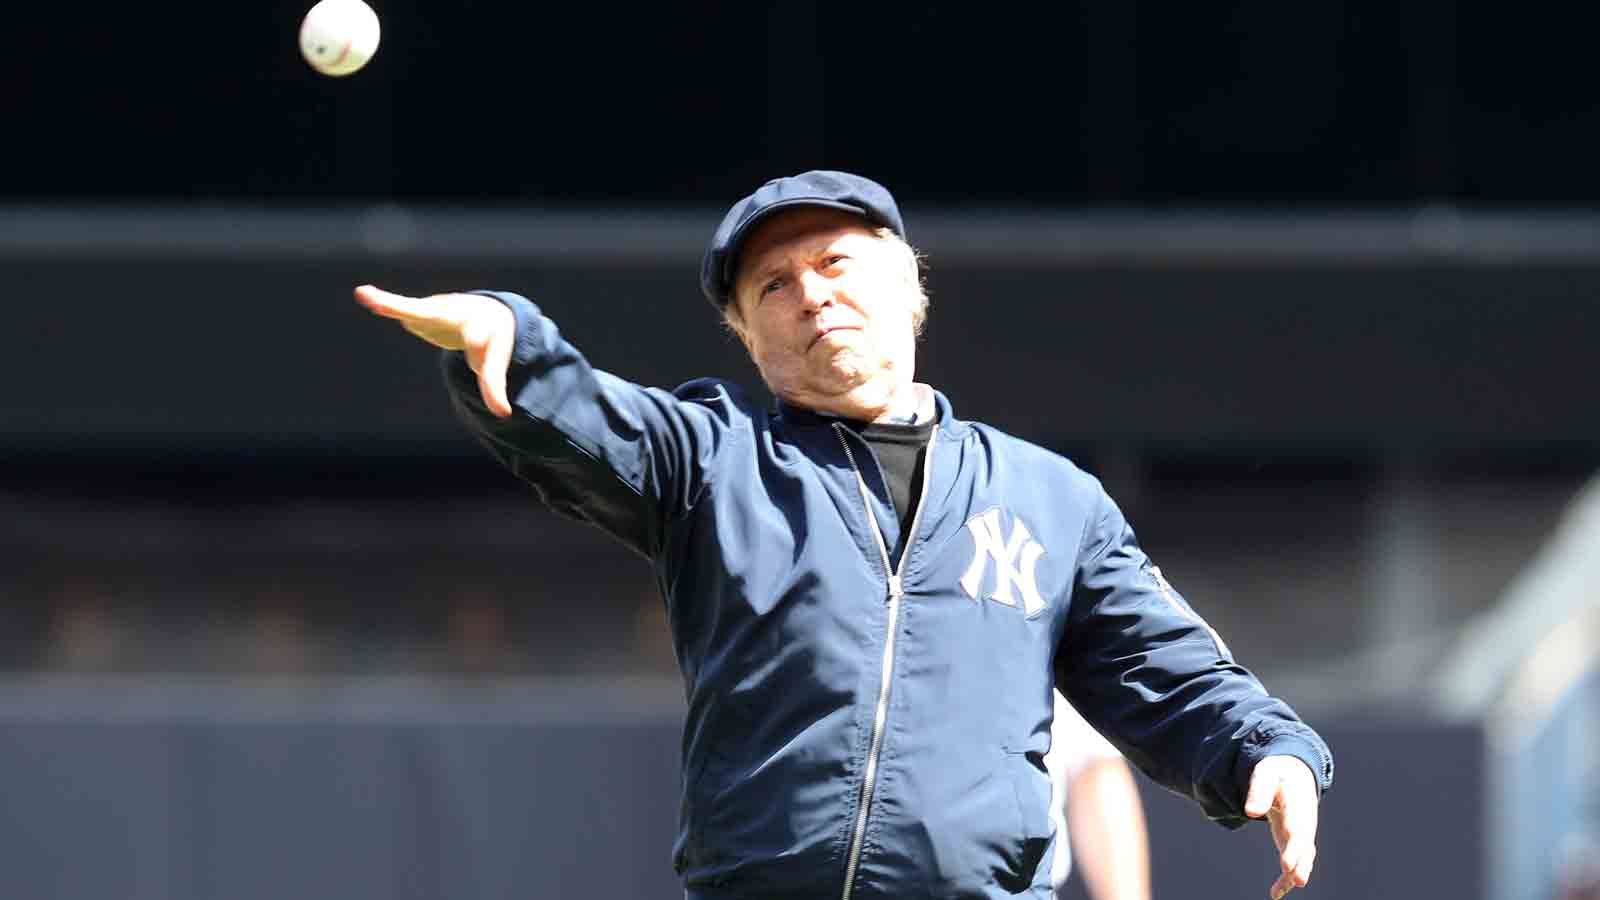 Billy Crystal Says Roger Maris, Aaron Judge Hold 'The Clean Record' – NBC  New York